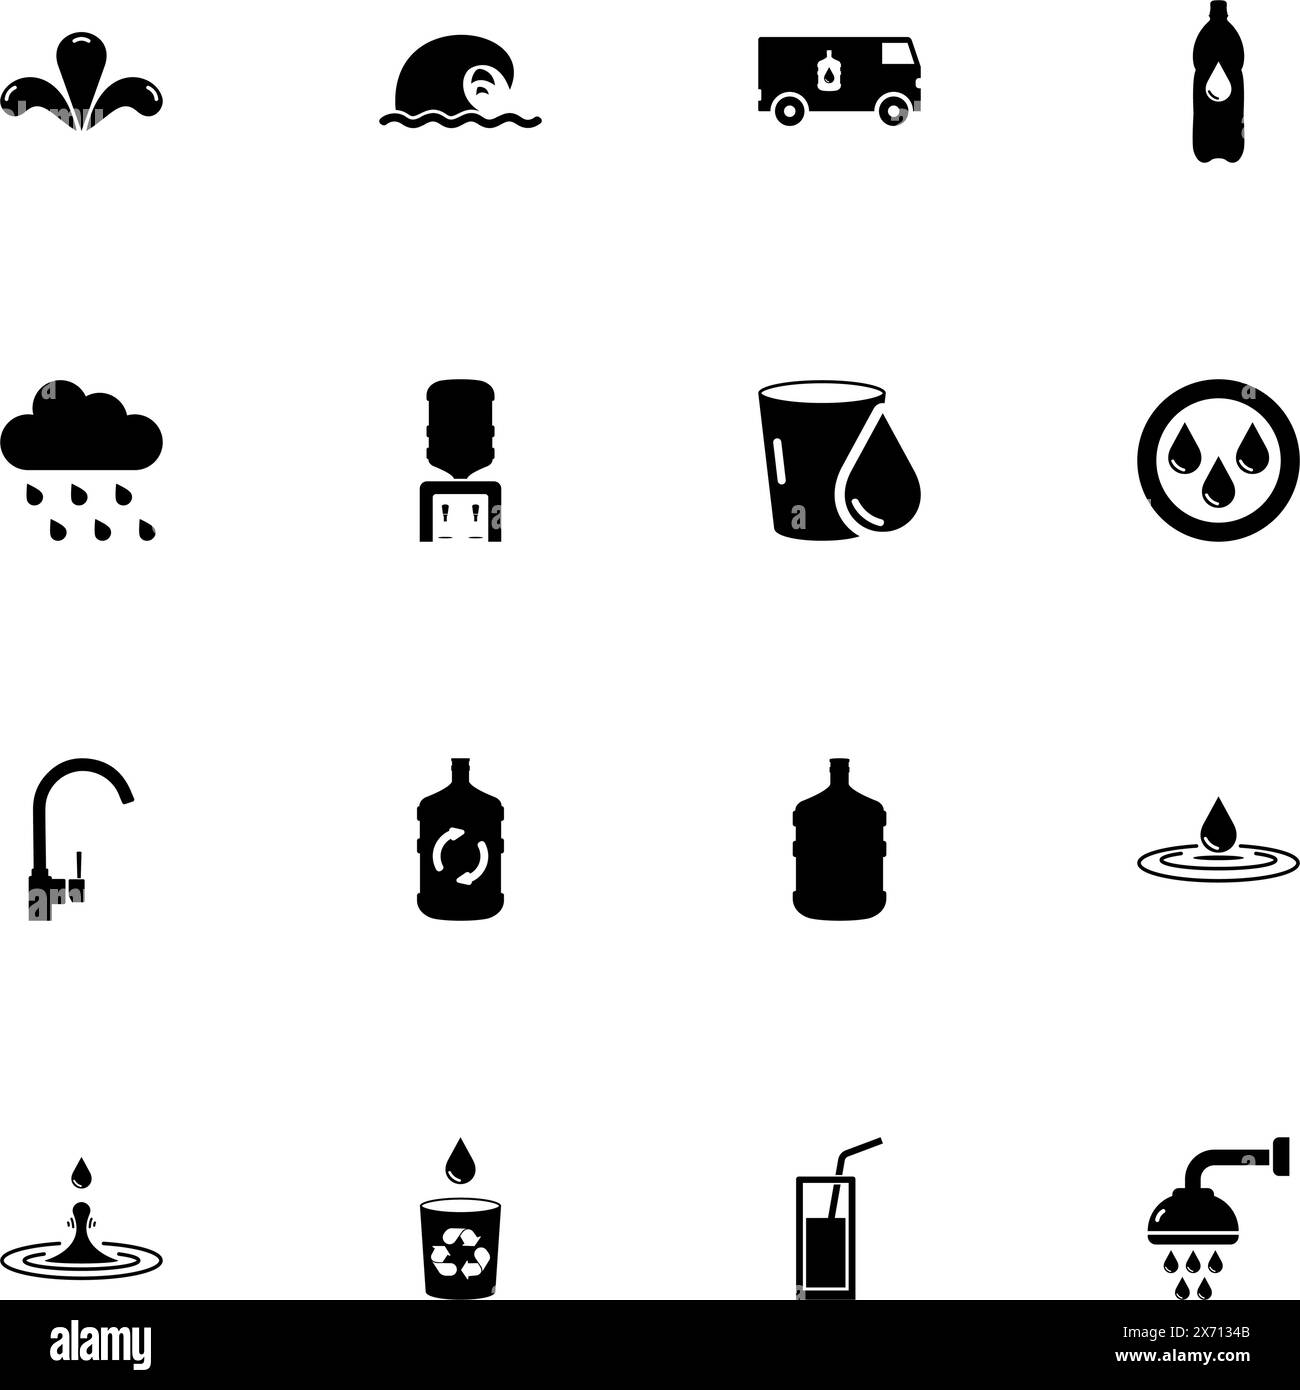 Water icon - Expand to any size - Change to any colour. Perfect Flat Vector Contains such Icons as bottle, dispenser, rain, transportation, container, Stock Vector